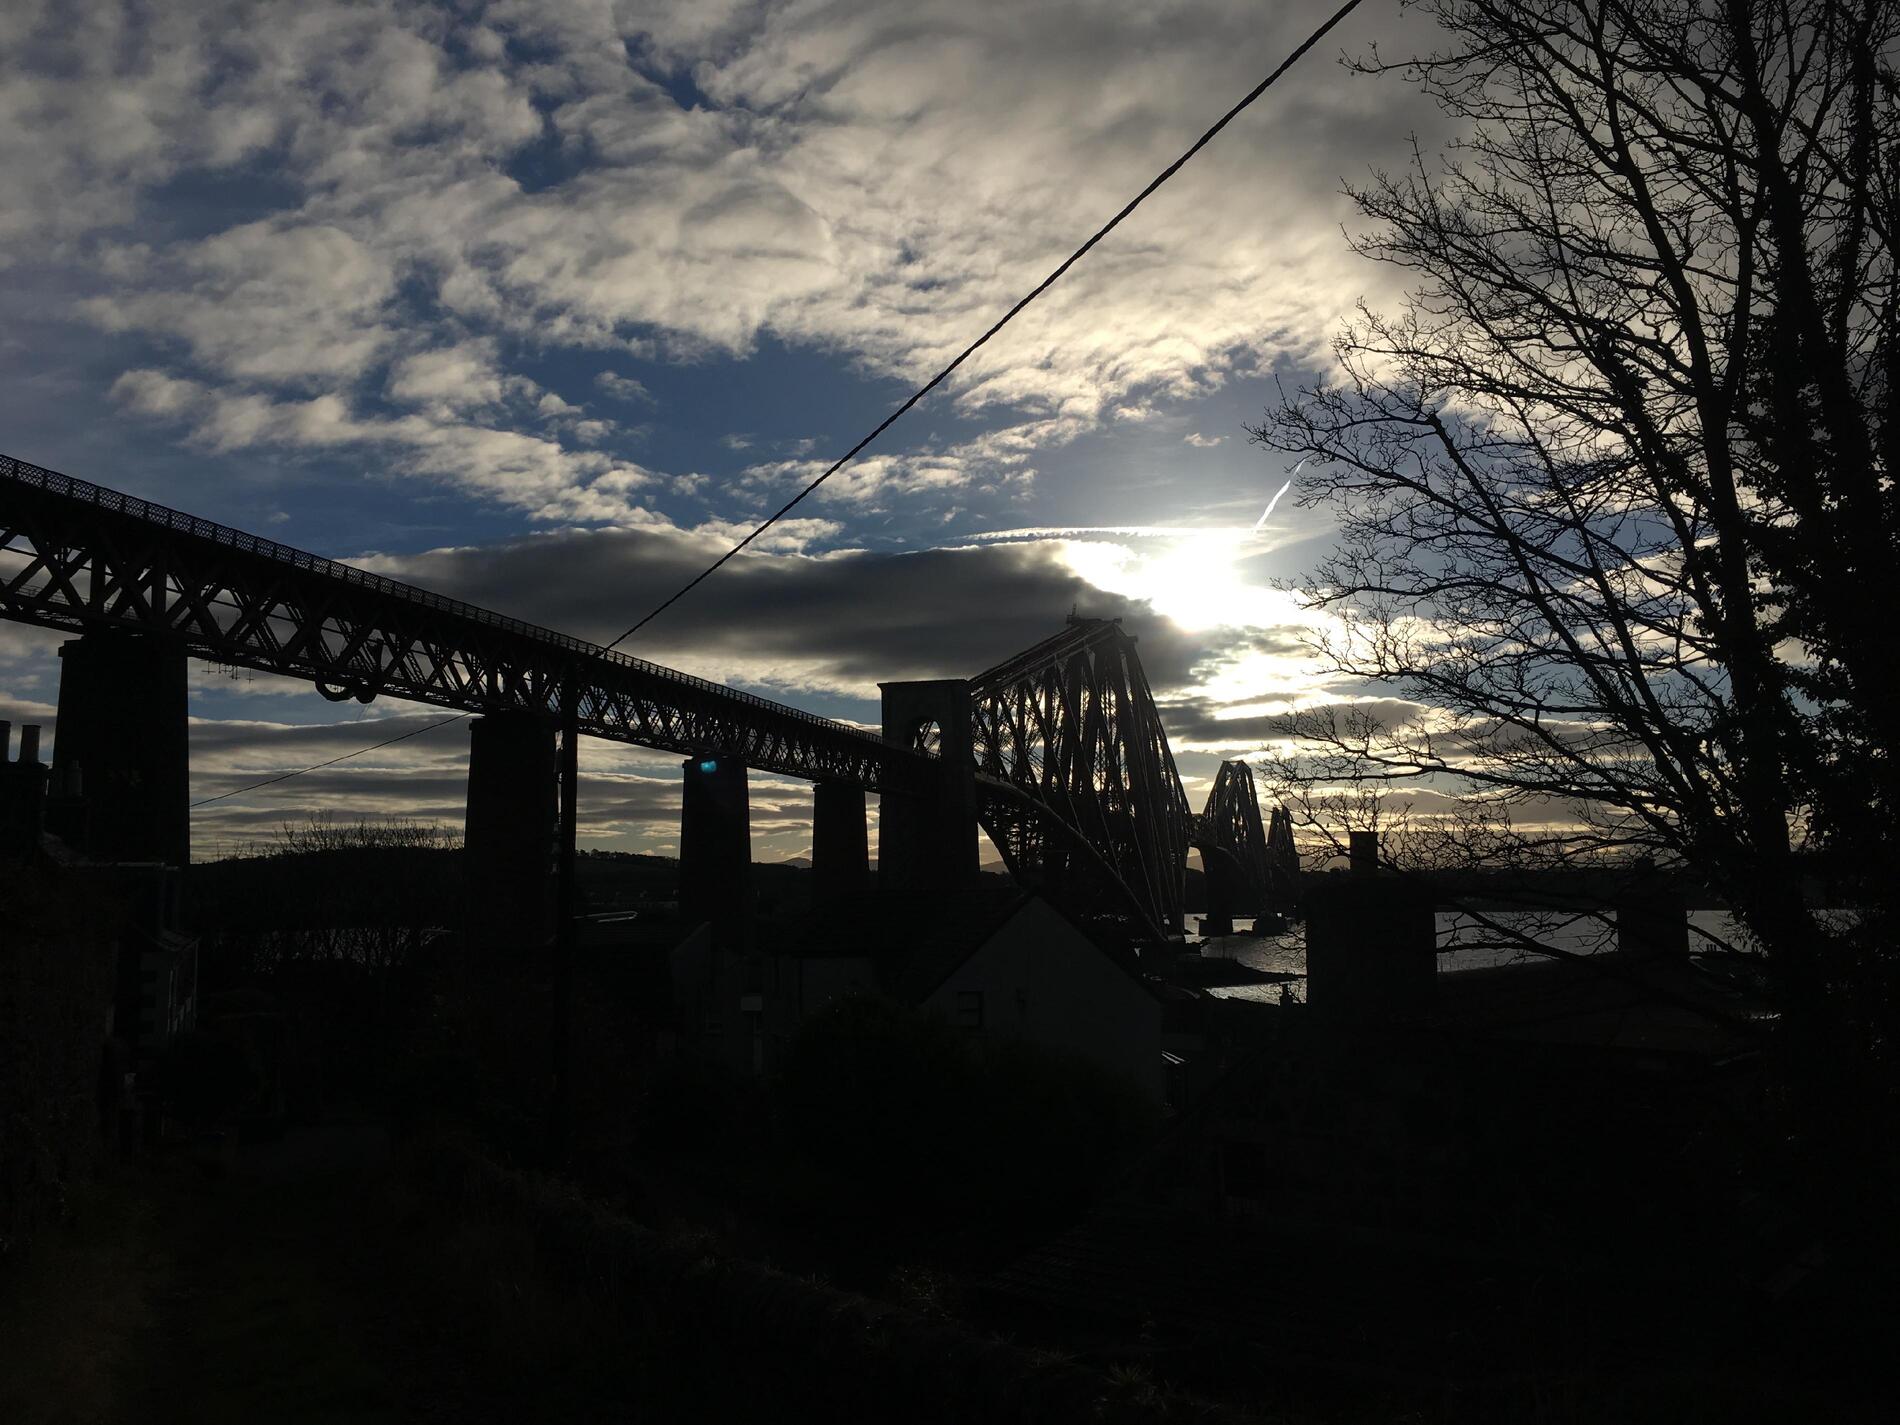 A silhouette of the bridge and some trees against a grey sky.